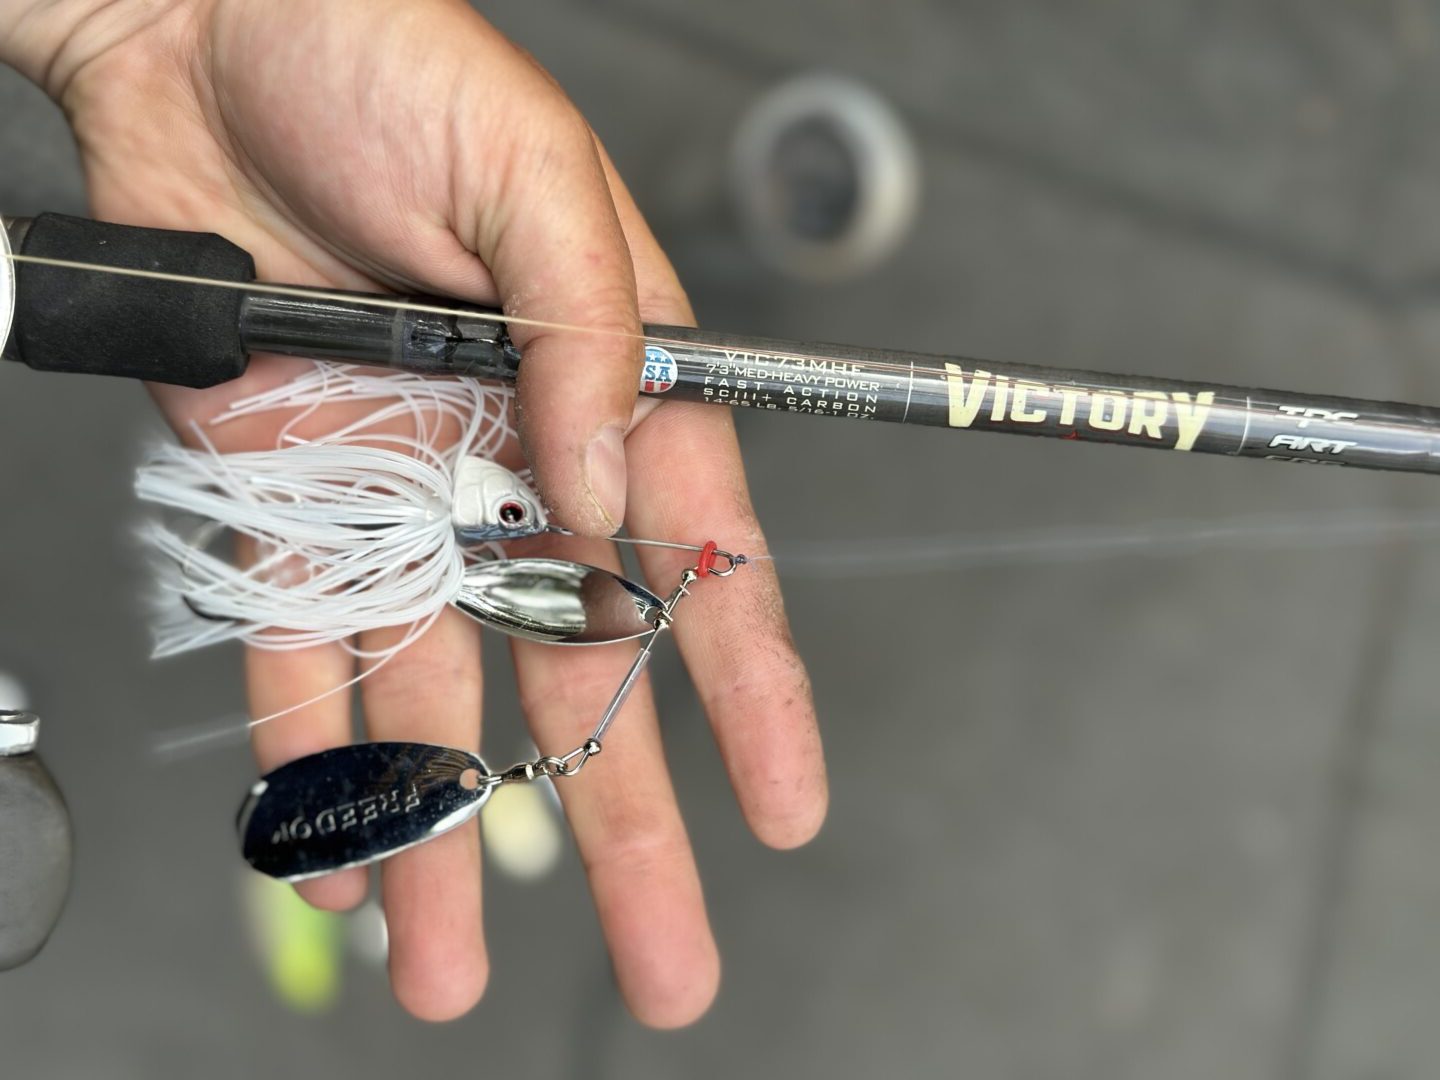 Maximize Your Spinnerbait with the Right Trailer